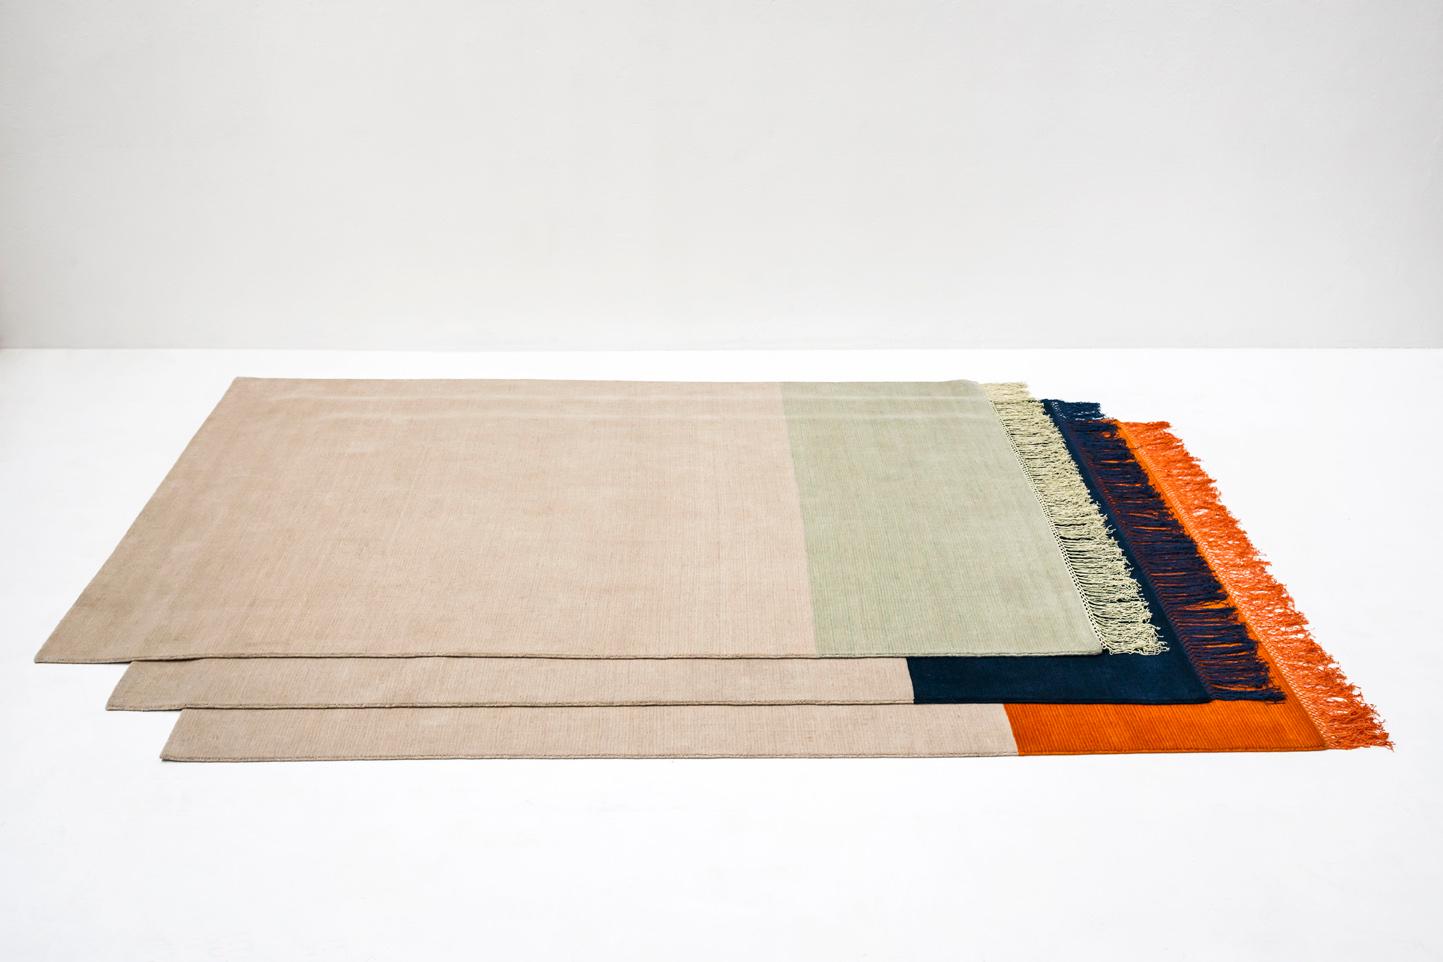 Ancient wisdom and contemporary spirit weave together in this collection of carpets, hand weaved by skilled artisans. The yarn is fixed to the loom to create a longitudinal warp on which, working from the bottom towards the top, a weave of